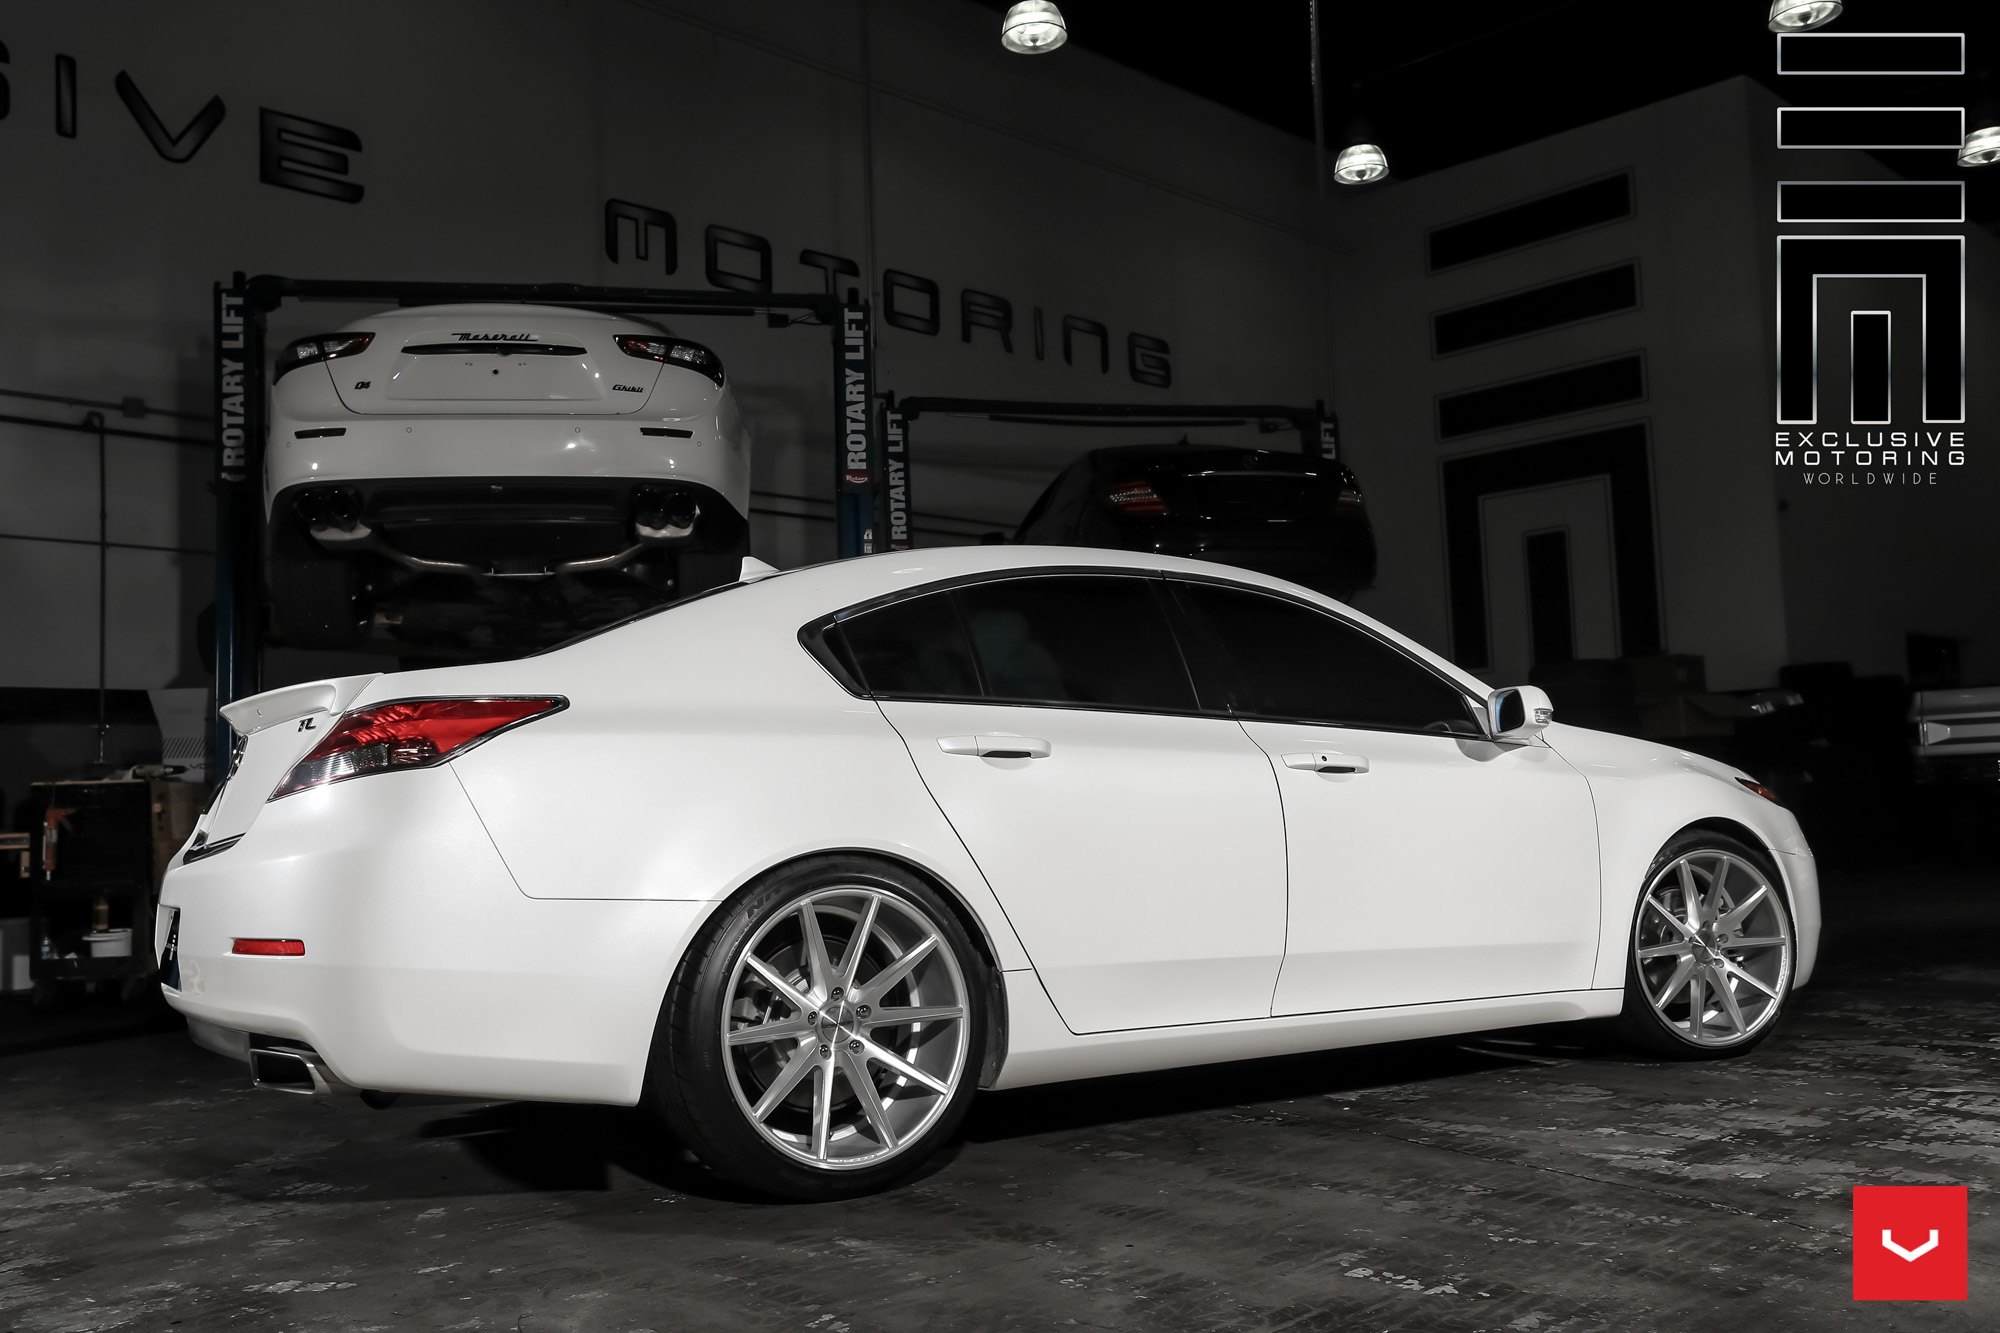 Acura TL Lowered Suspension - Photo by Vossen